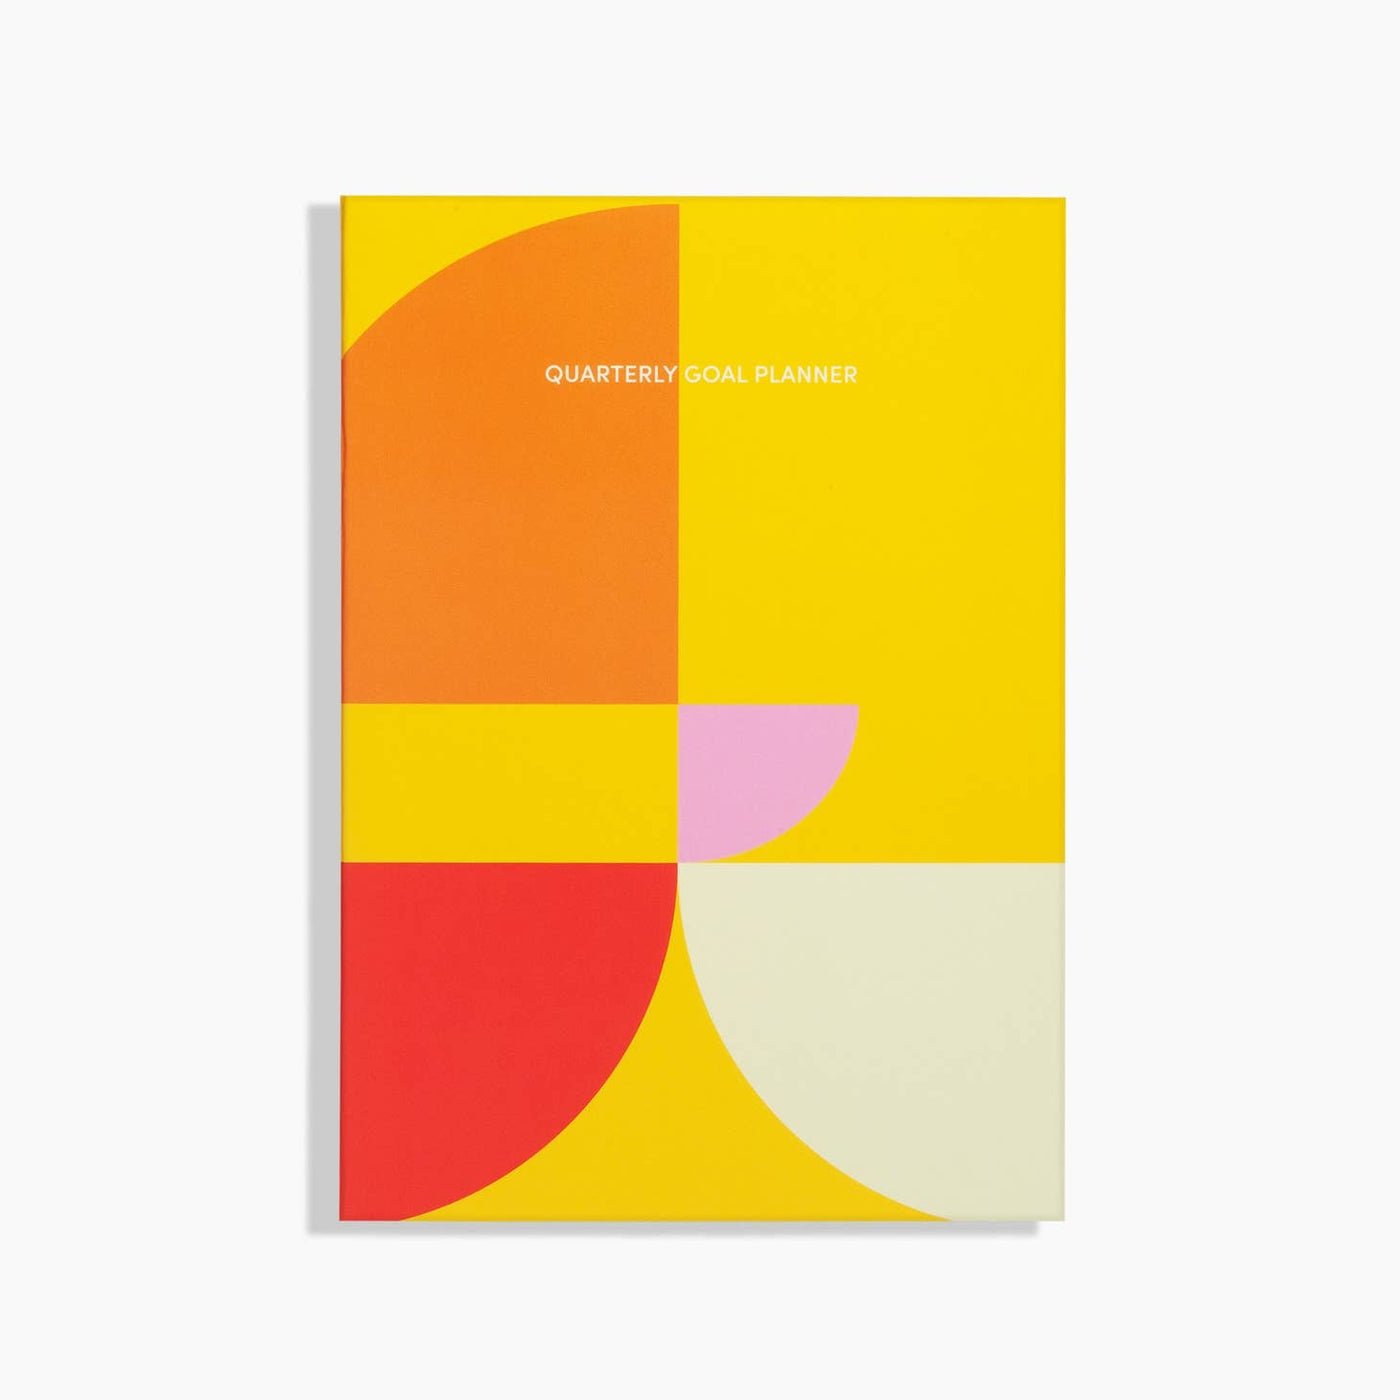 Front cover of quarterly goal planner; colorblock design in yellow, orange, red, pink and cream.